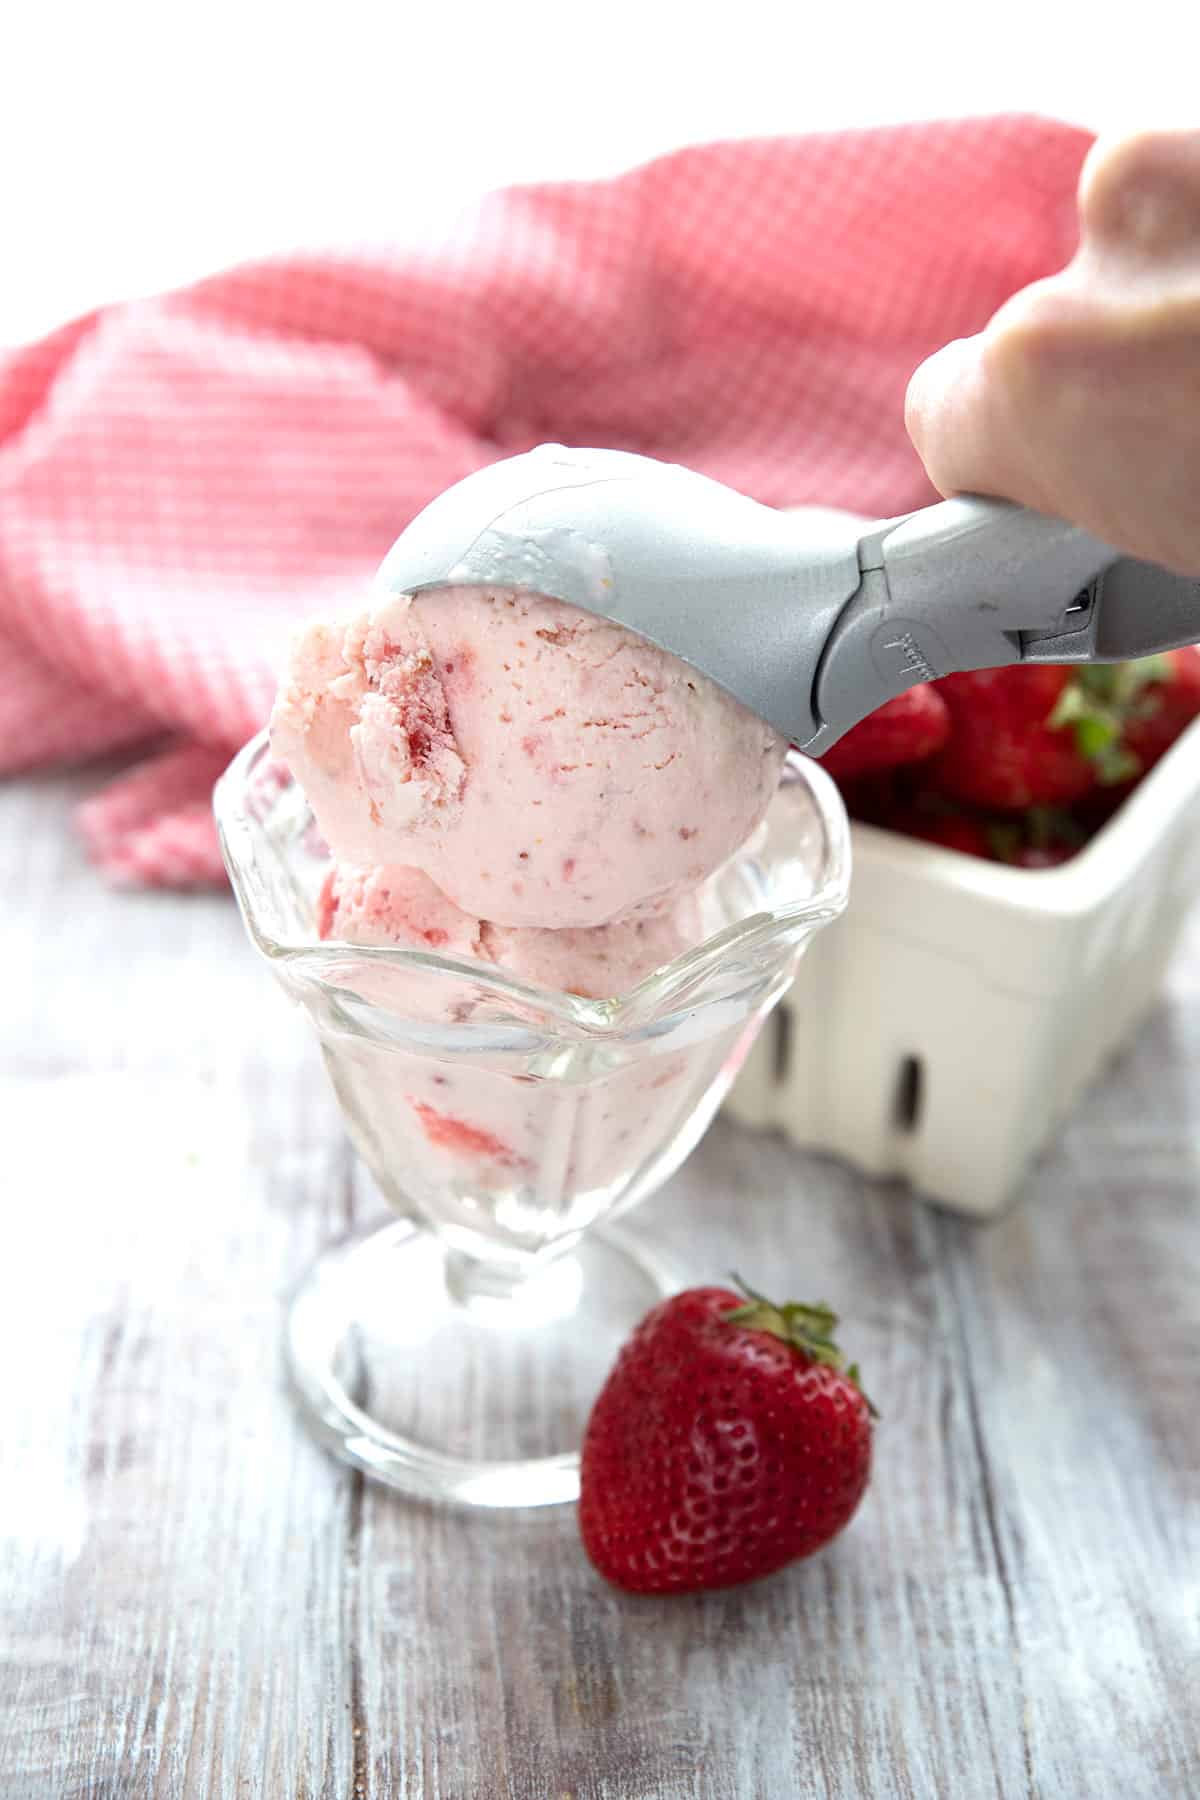 An ice cream scoop placing a scoop of keto ice cream into a glass dish.